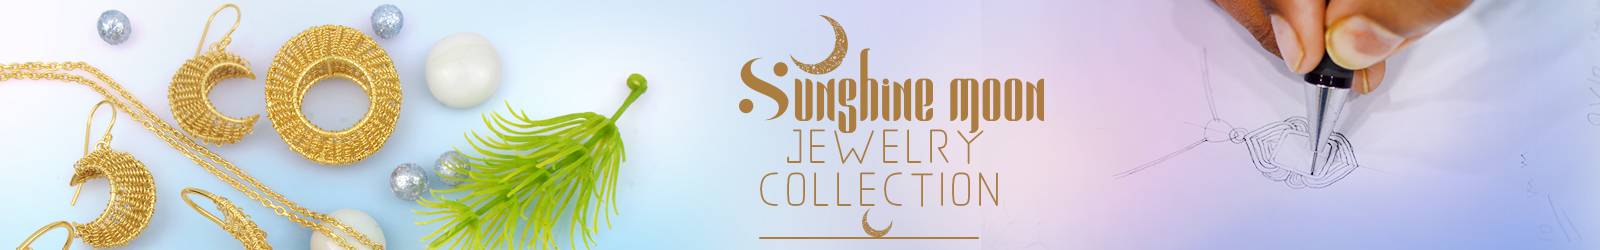 Sunshine Moon Jewelry Collection